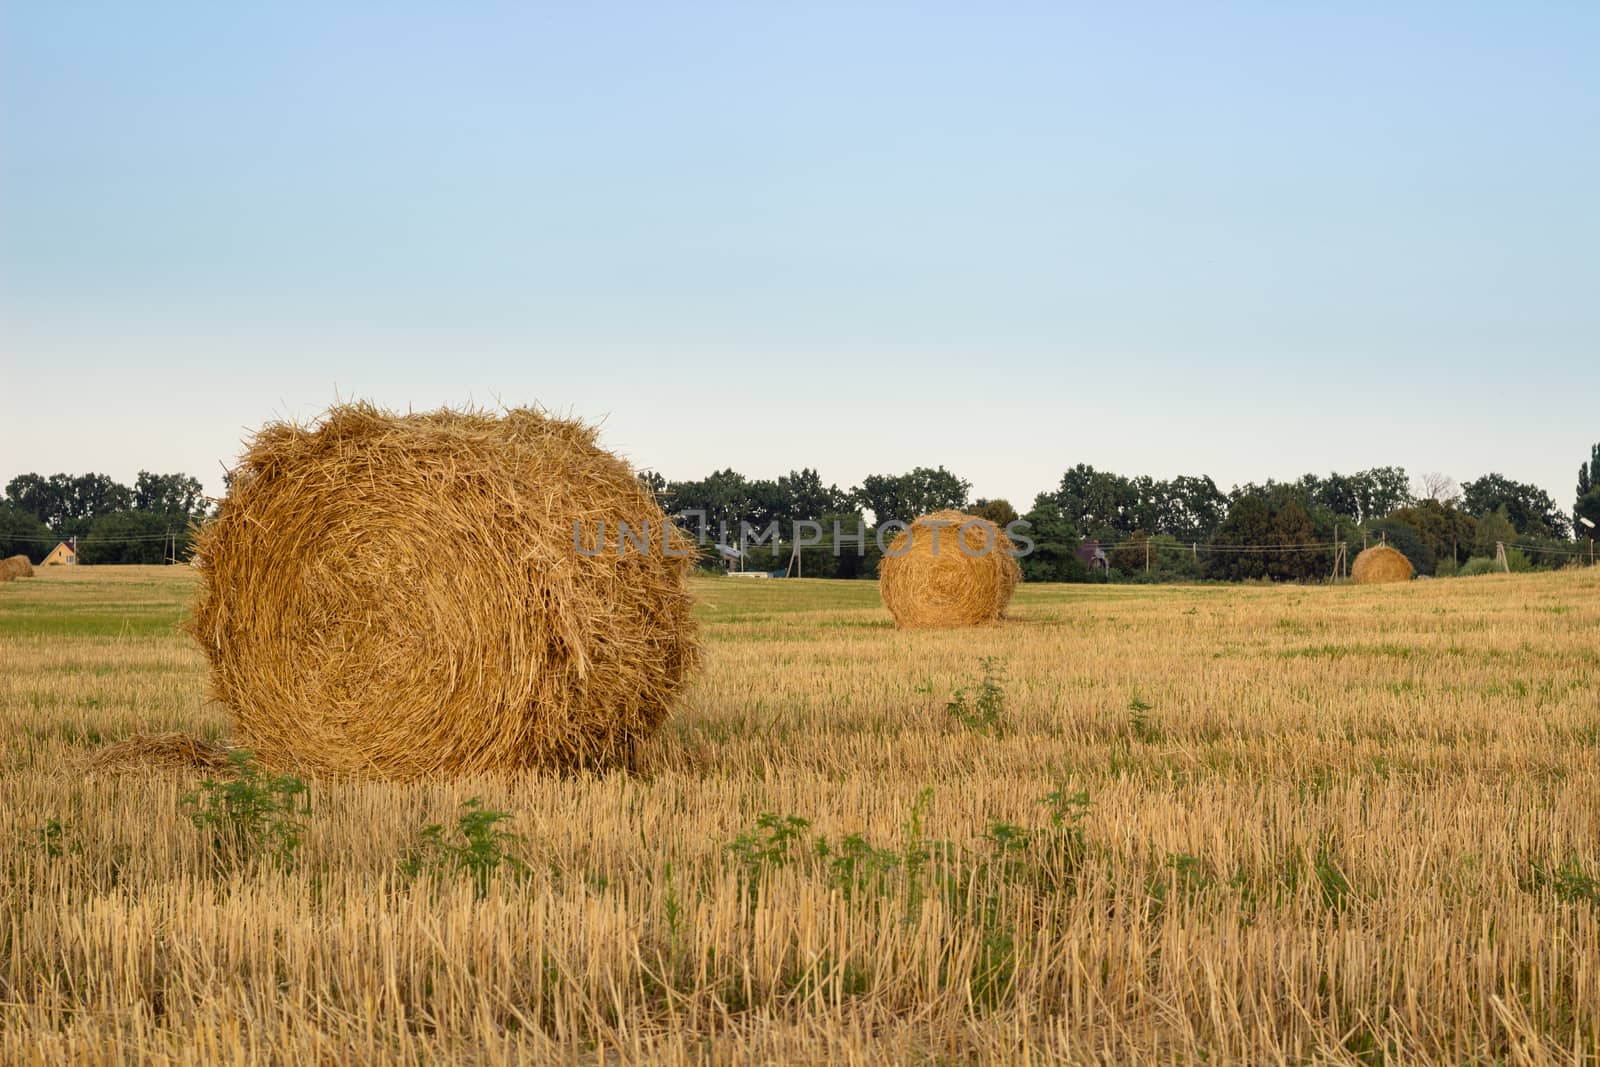 Hay dry stacks on countryside field during harvest time by VeraVerano